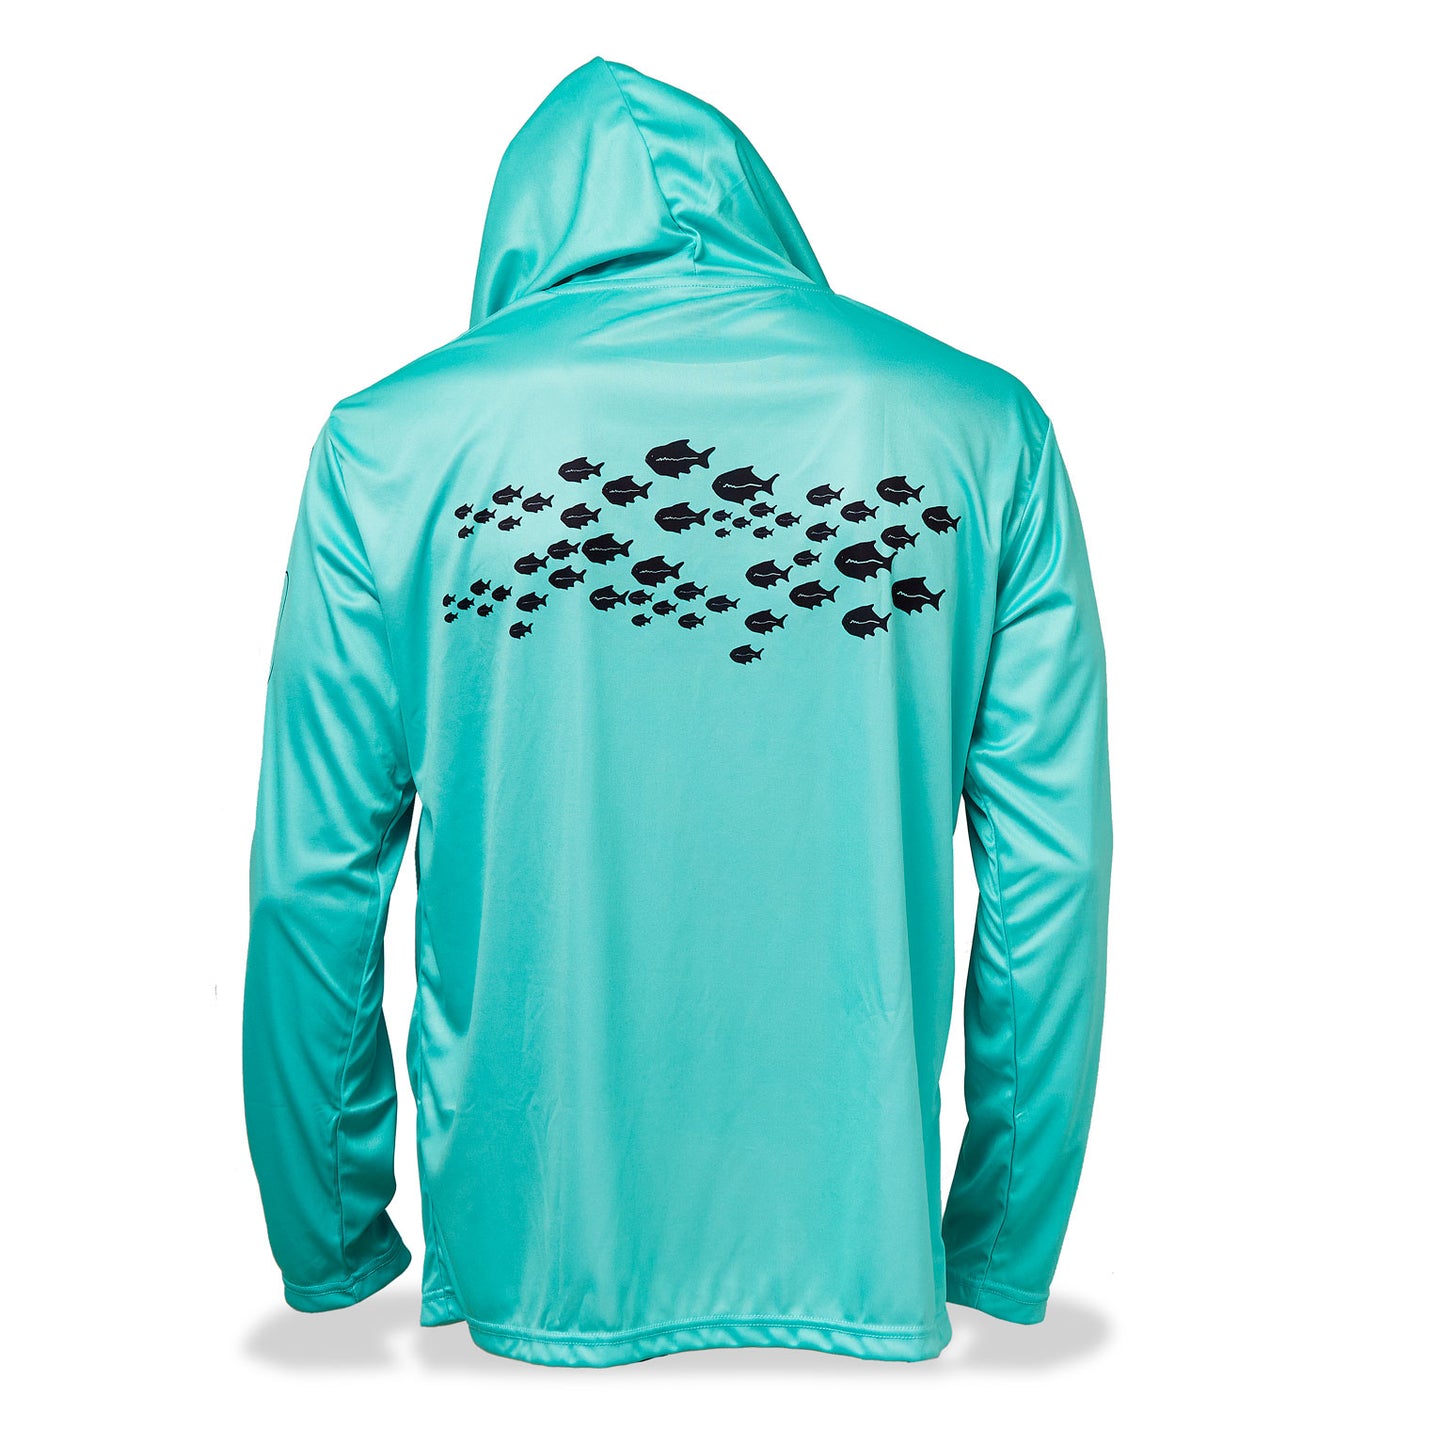 Dead Fish Hook long sleeve performance fishing shirt in turquoise with school of fish print on back - back view